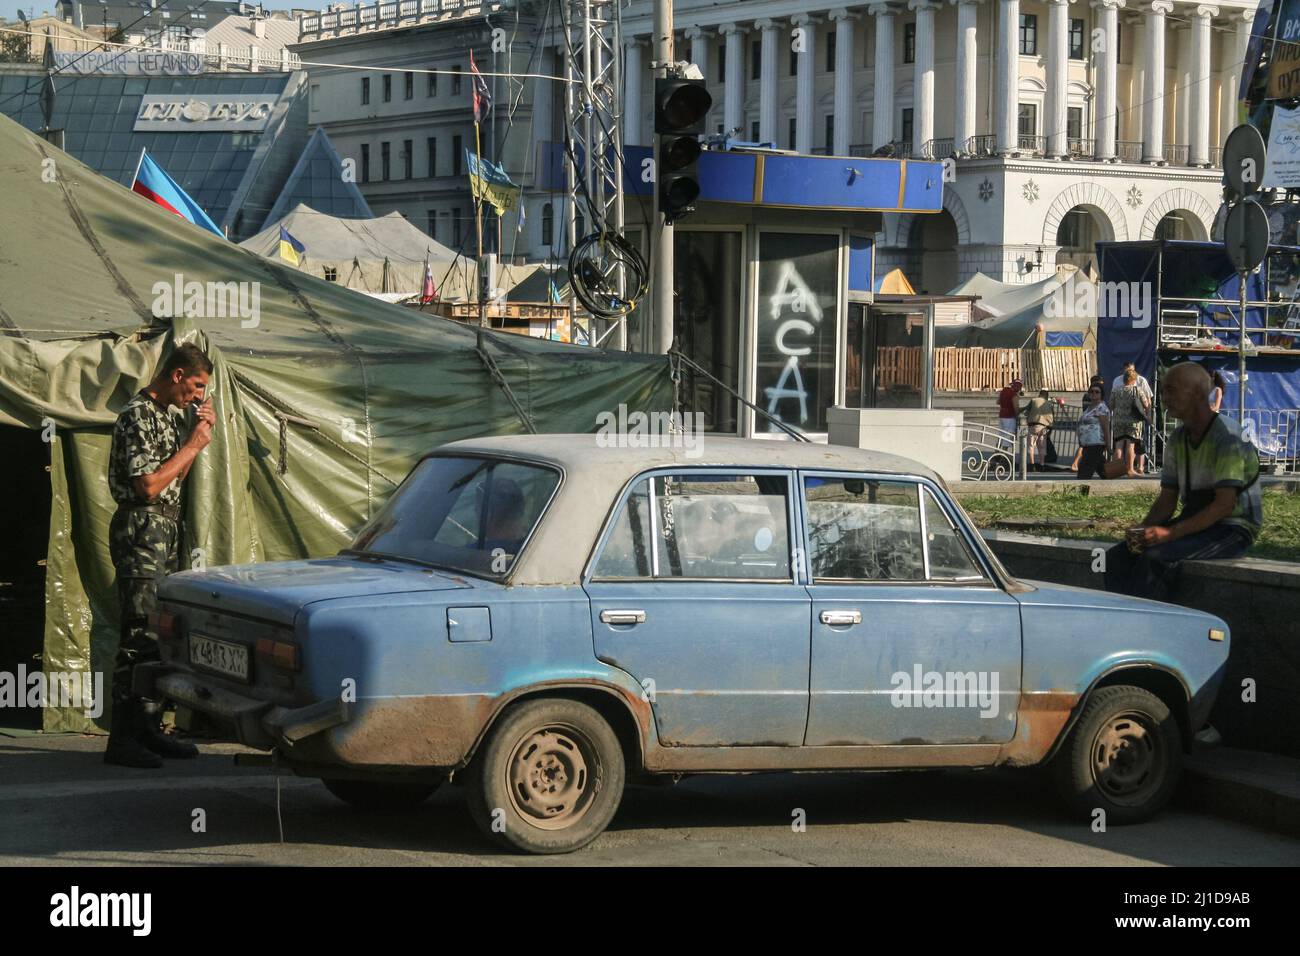 Picture of barricades and tents hosting protesters after the 2014 Maidan revolution, on Maidan square in Kyiv, Ukraine with men standing in front of a Stock Photo